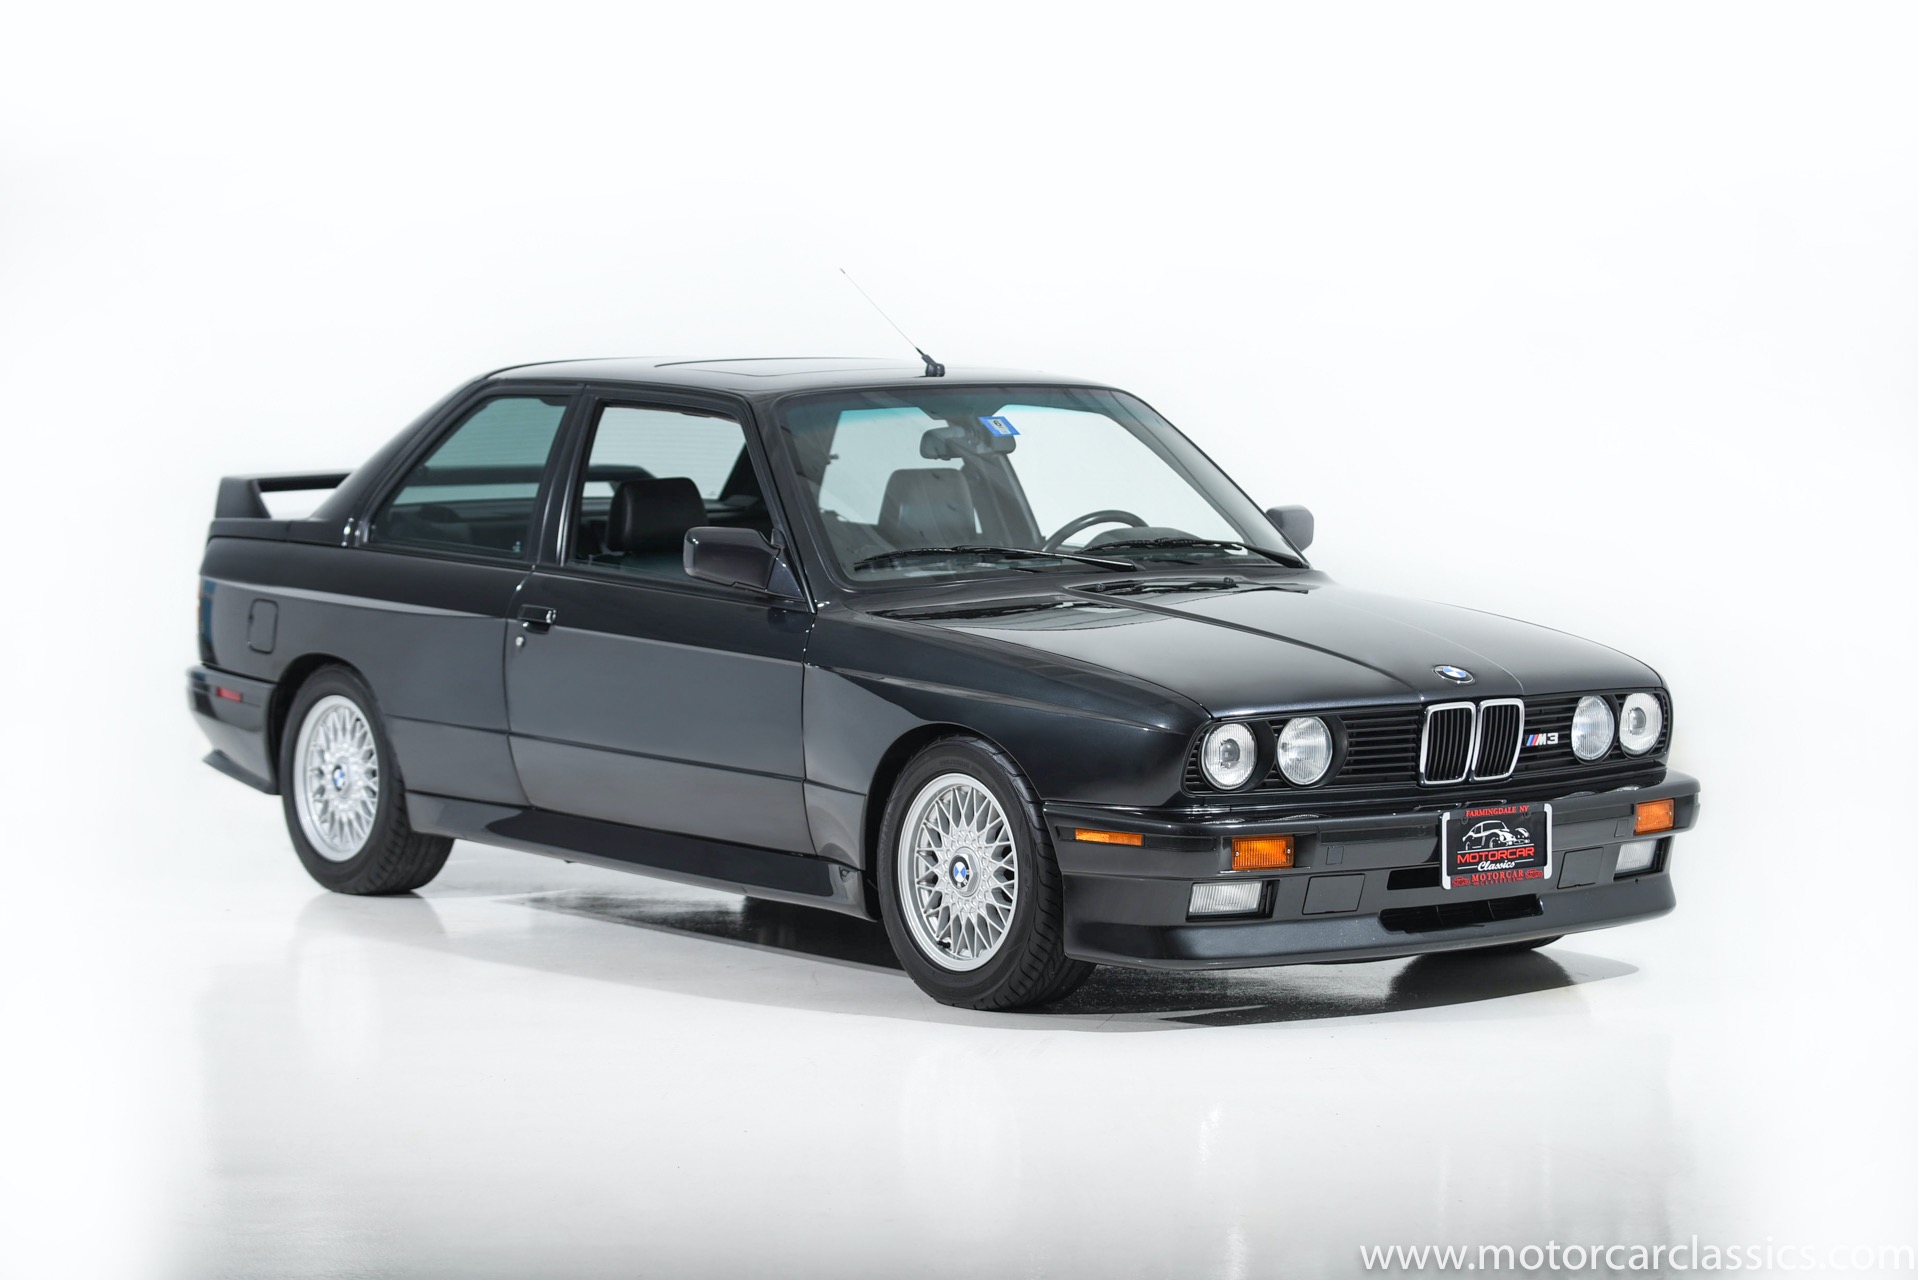 Used 19 Bmw M3 For Sale 49 800 Motorcar Classics Stock 1581